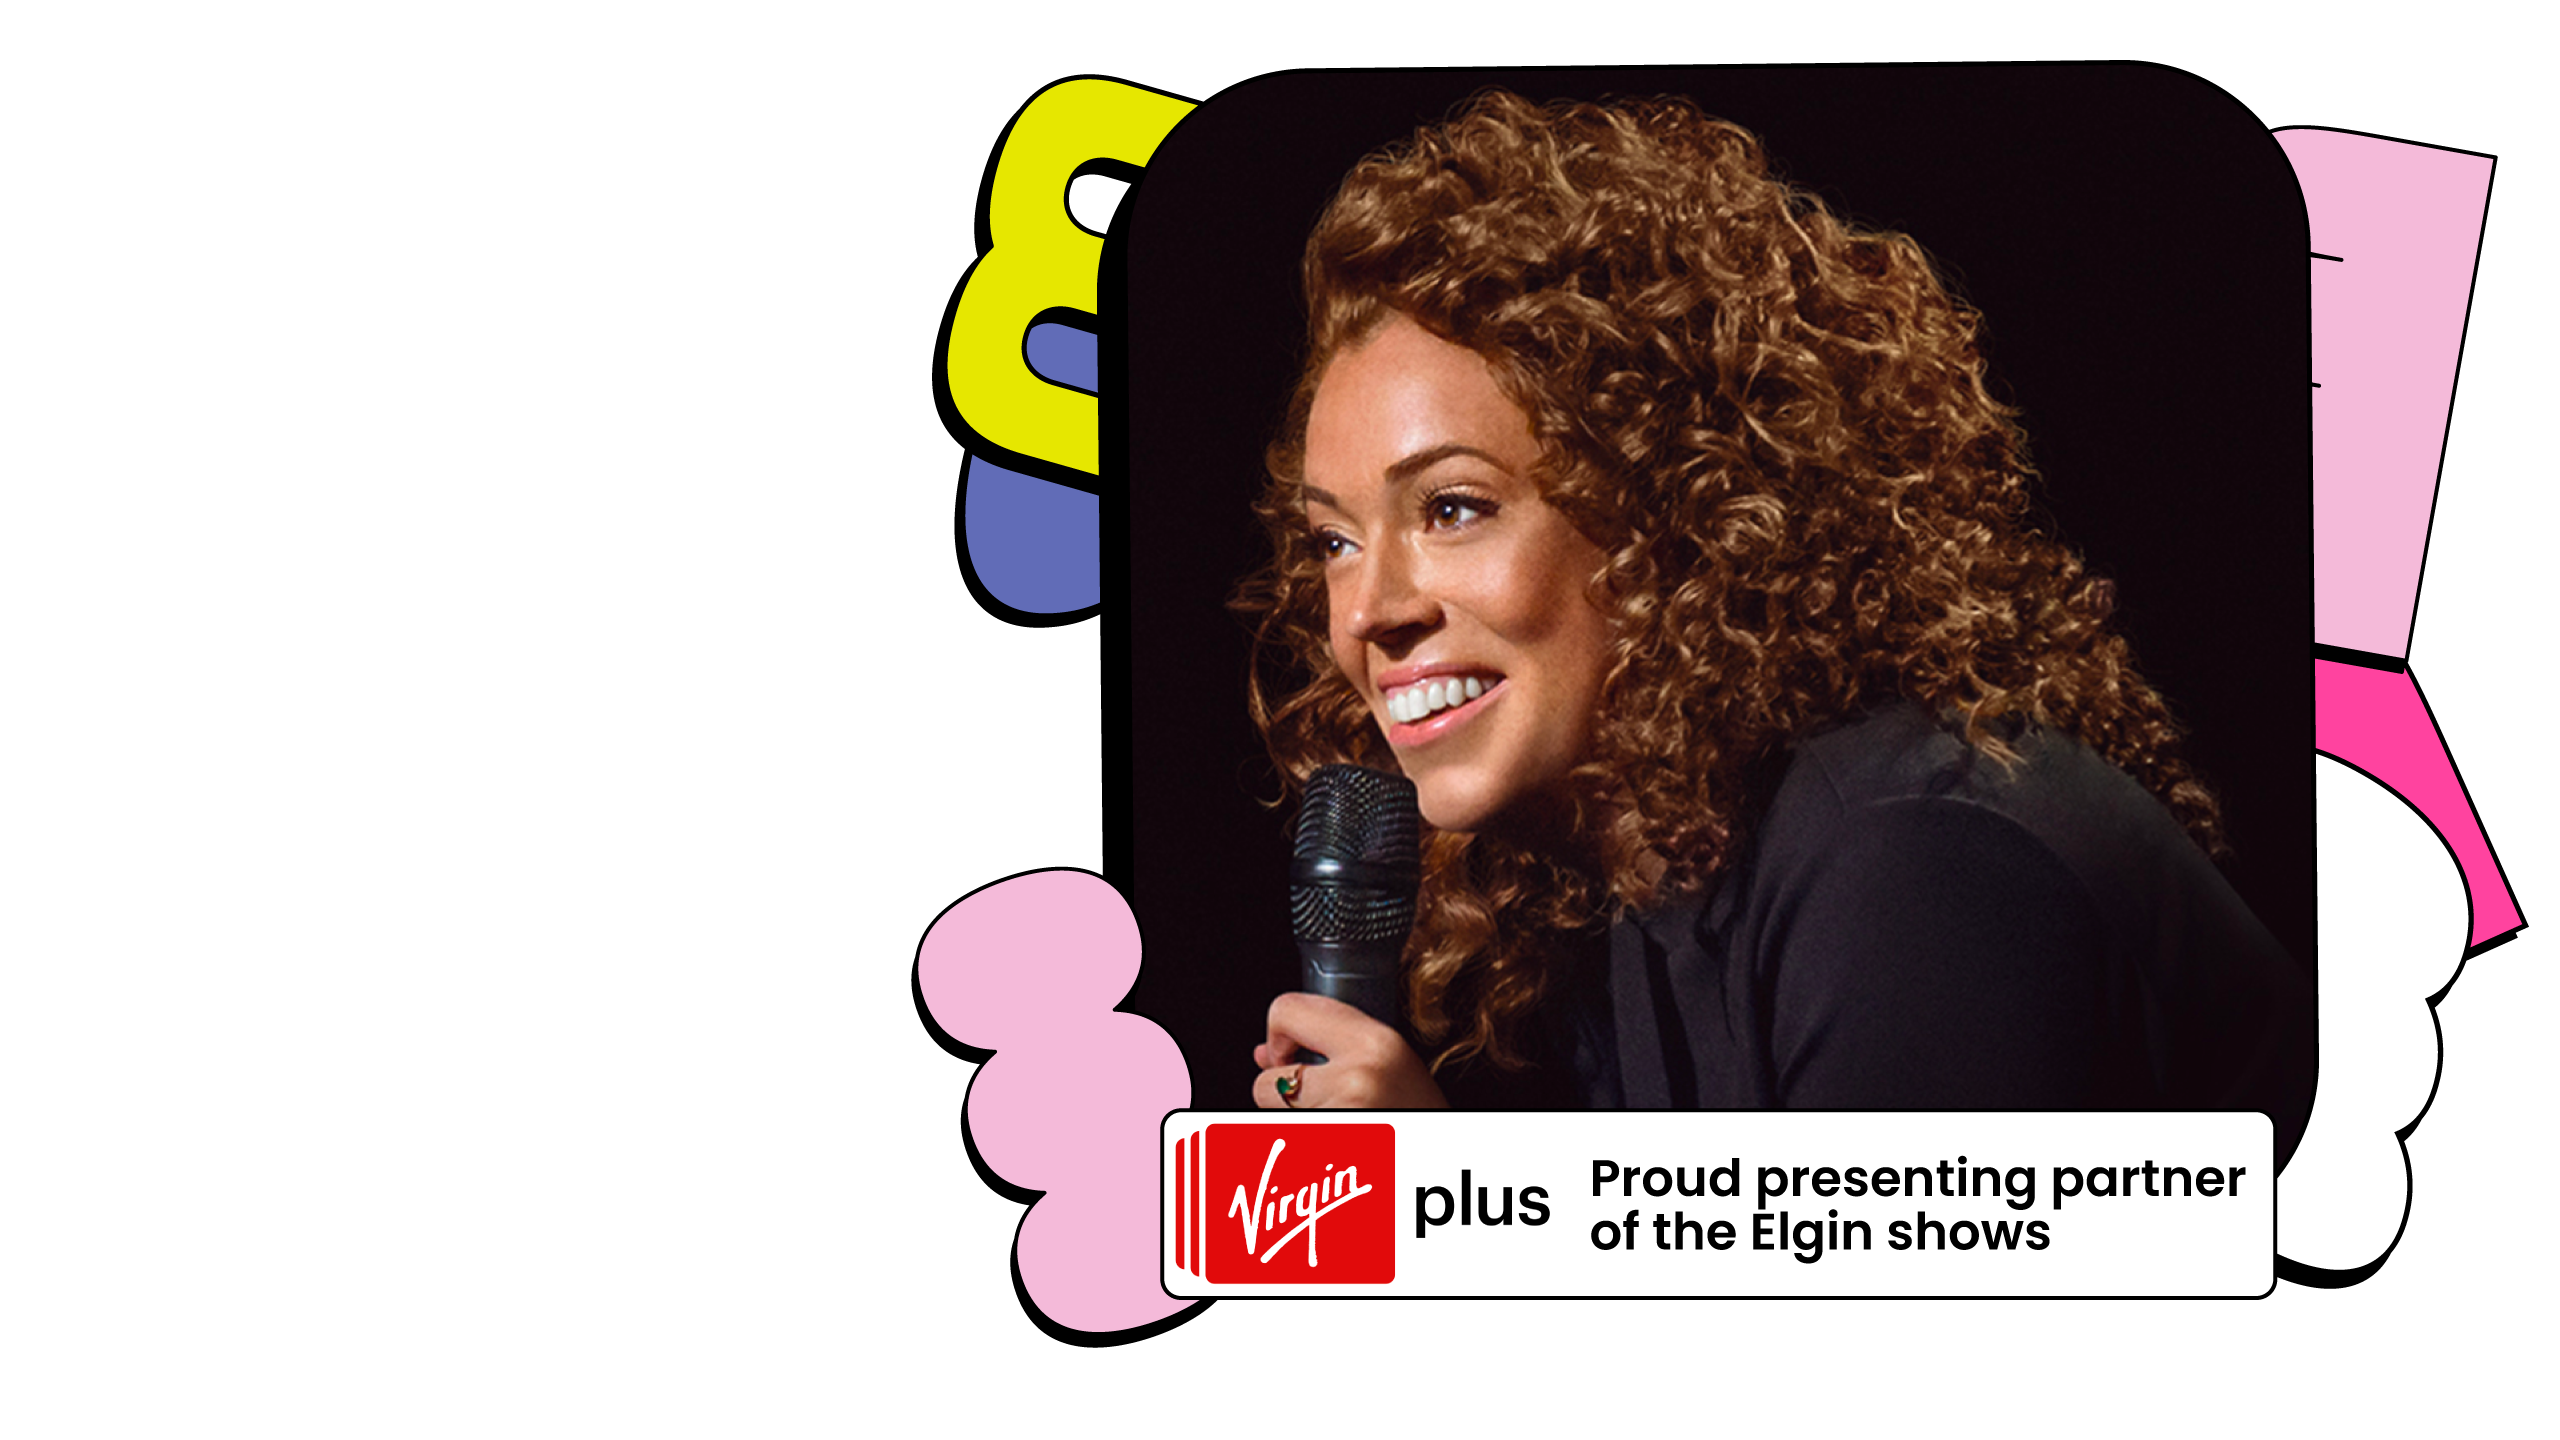 Promotional image for Michelle Wolf - It's great to be here